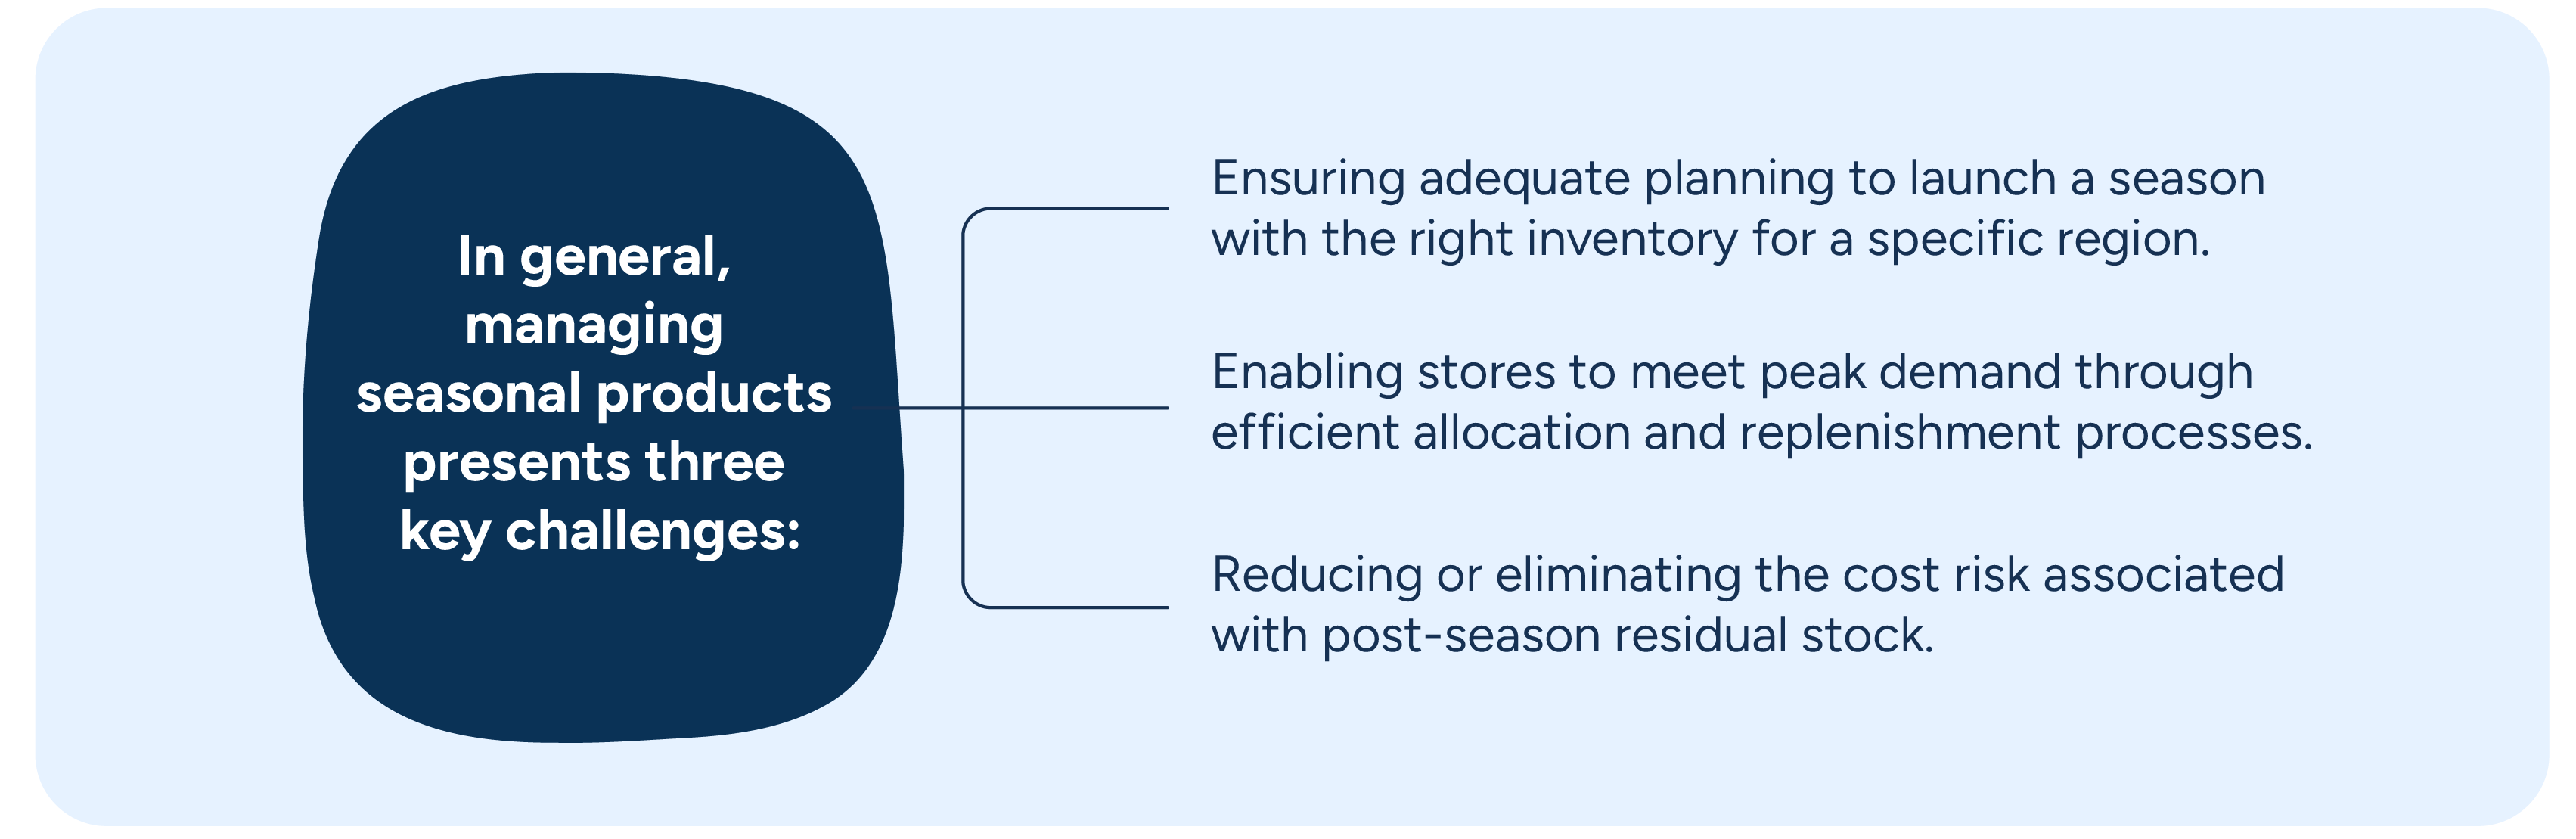 A diagram detailing the three key challenges involved with seasonal product management: planning to launch a season with the right regional-specific inventory, meeting peak demand through efficient allocation and replenishment processes, and reducing or eliminating the cost risk associated with post-season residual stock.